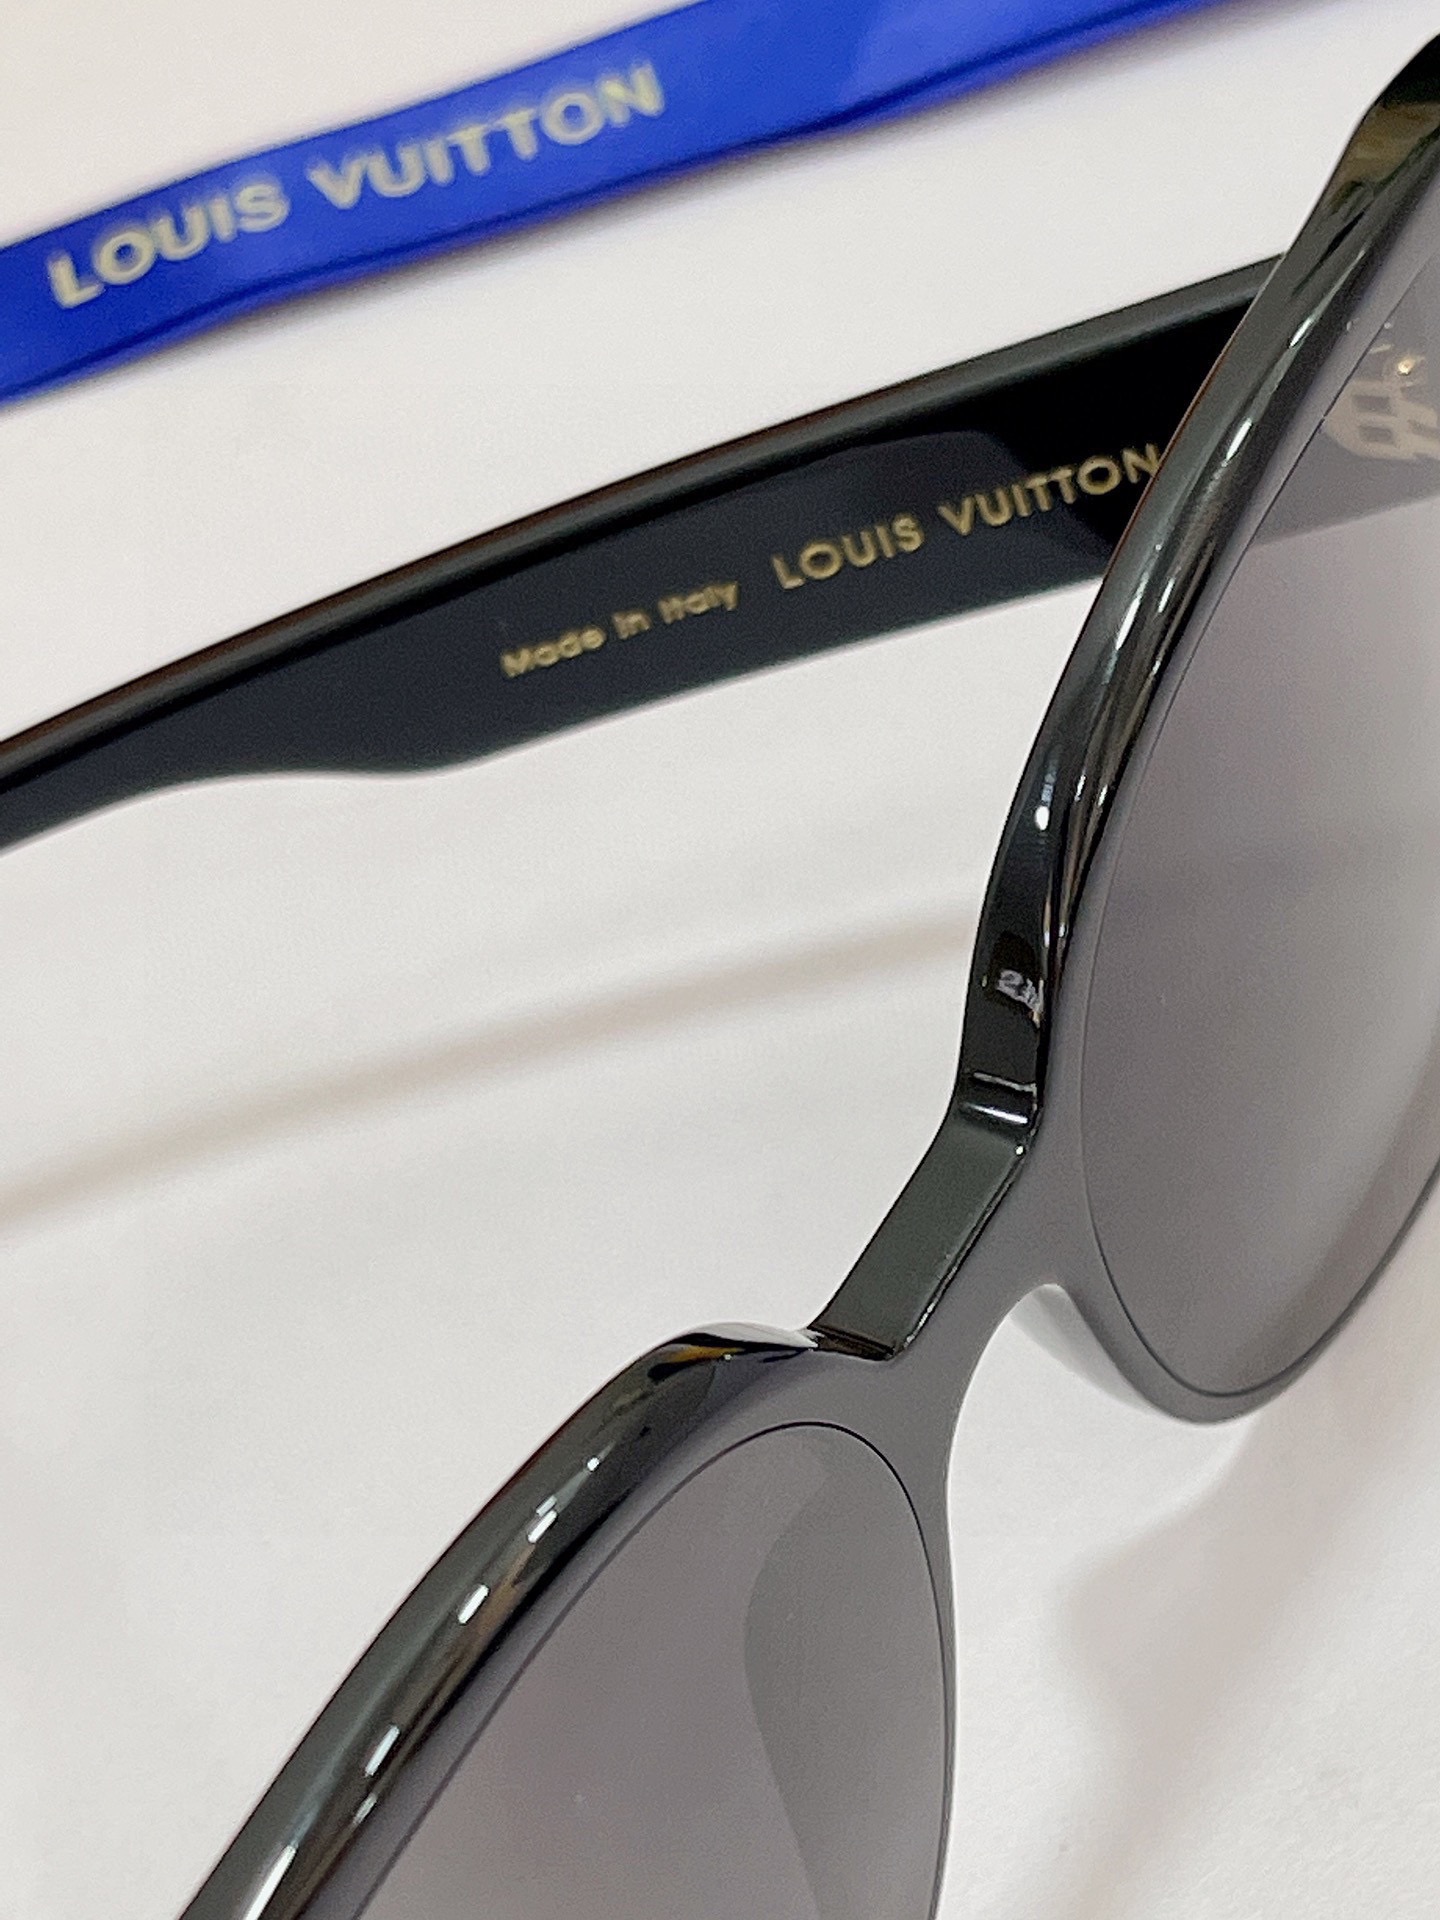 Louis Vuitton 'In The Mood For Love' Sunglasses – The Luxury Quest